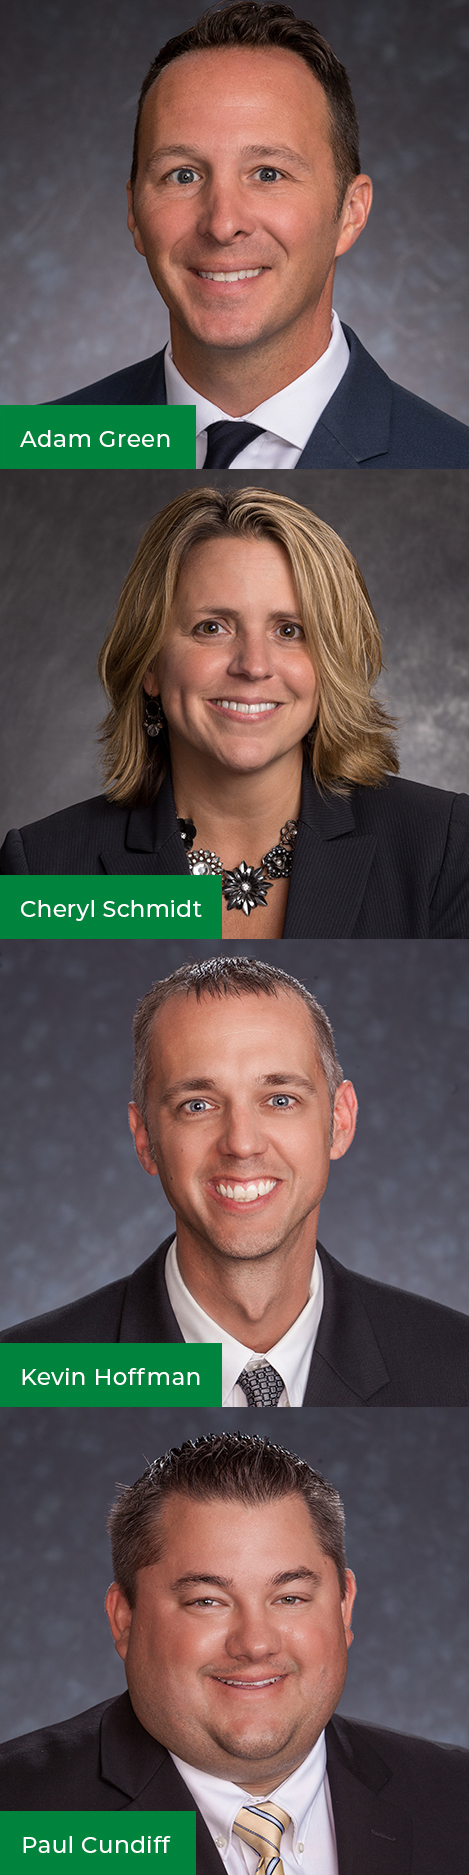 LeChase's new vice presidents: Adam Green, Cheryl Schmidt, Kevin Hoffman and Paul Cundiff